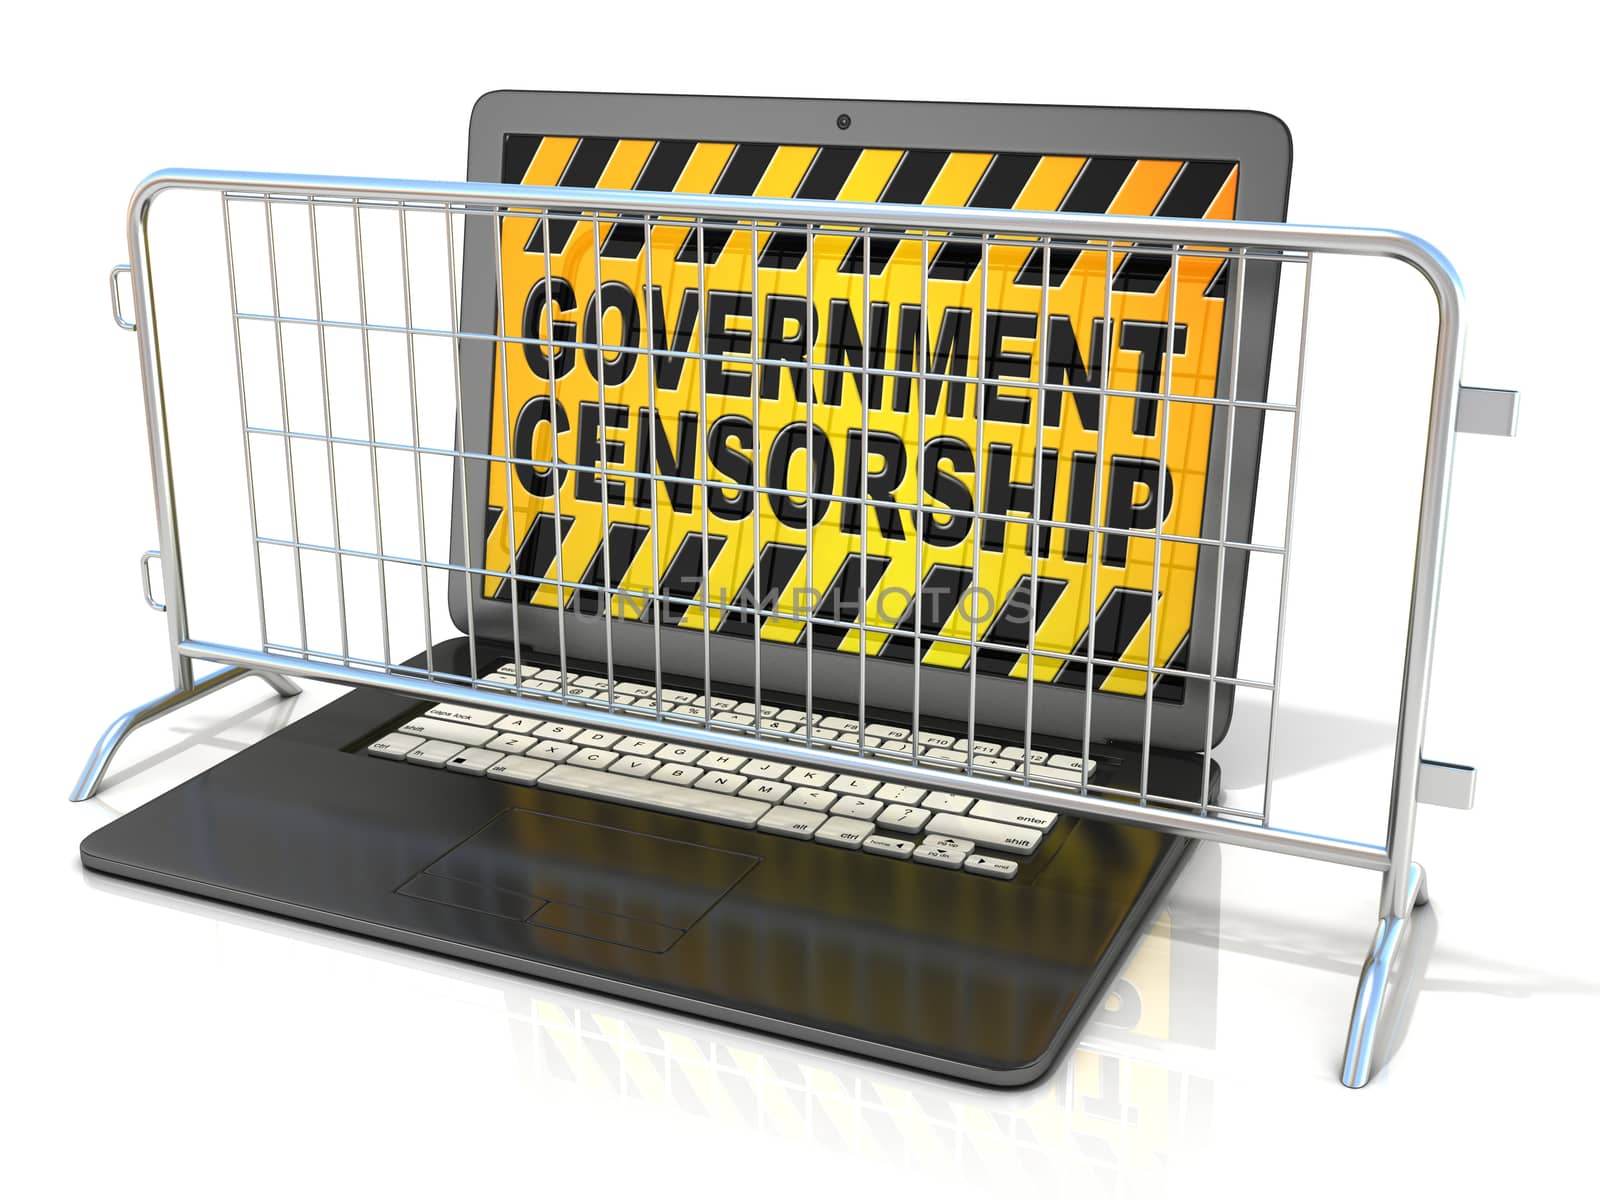 Black laptop with GOVERNMENT CENSORSHIP sign on screen, and steel barricades. 3D rendering isolated on white background